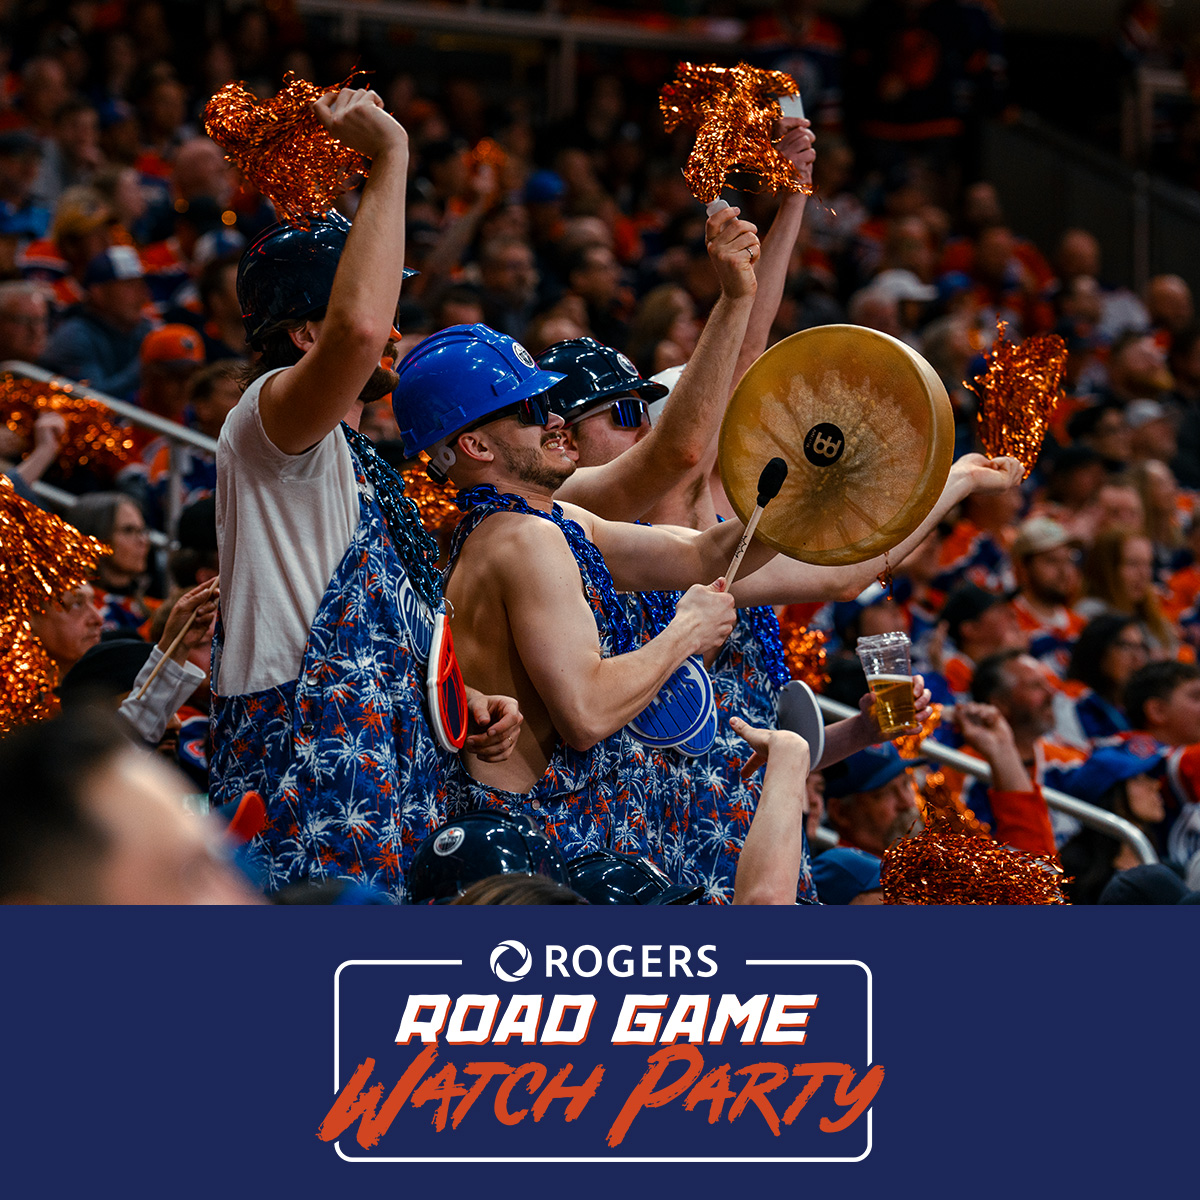 🧡💙 The @Rogers Road Game Watch Party returns TONIGHT at #RogersPlace for Game 7️⃣ of the @EdmontonOilers series against the Canucks!!⁠ ⁠ Doors: 5:30 PM⁠ Puck Drop: 7 PM⁠ Studio 99 → RogersPlace.com/Studio99 Parking → IceDistrict.com/Parking 50/50 → edmontonoilers.com/5050FB